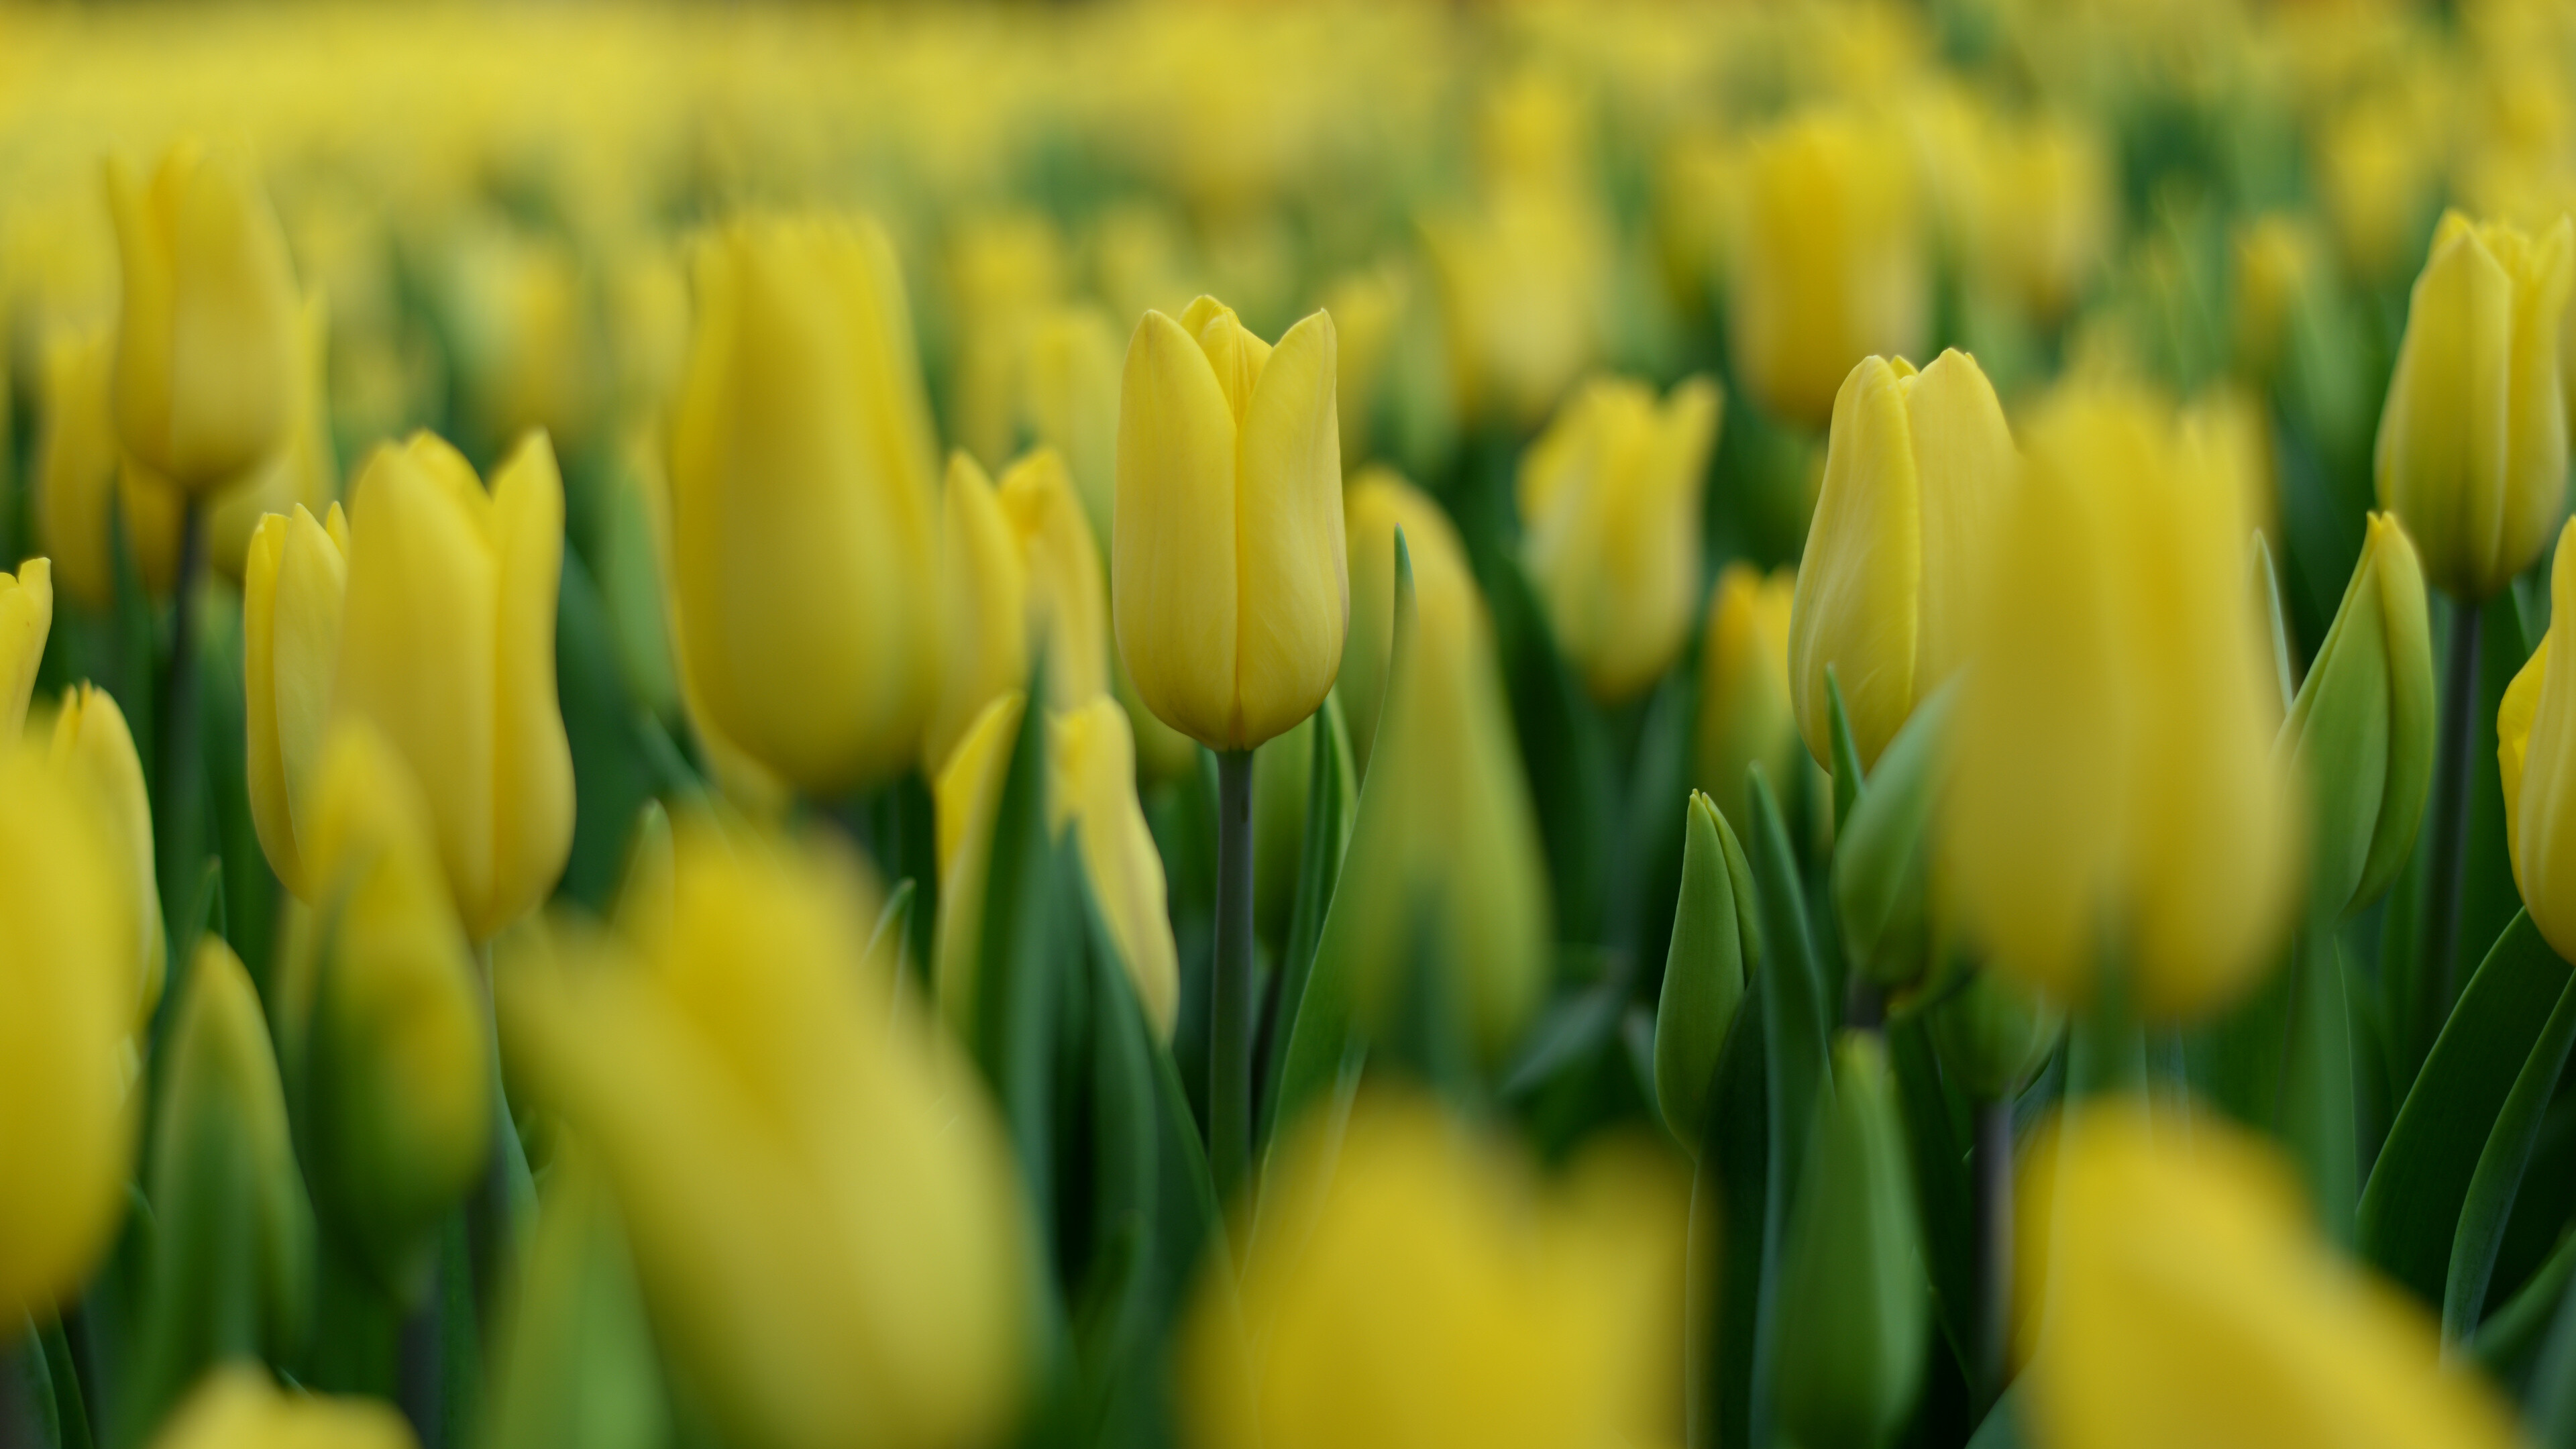 Tulip: Tulips originally were found in a band stretching from Southern Europe to Central Asia, but since the seventeenth century have become widely naturalised and cultivated. 3840x2160 4K Wallpaper.